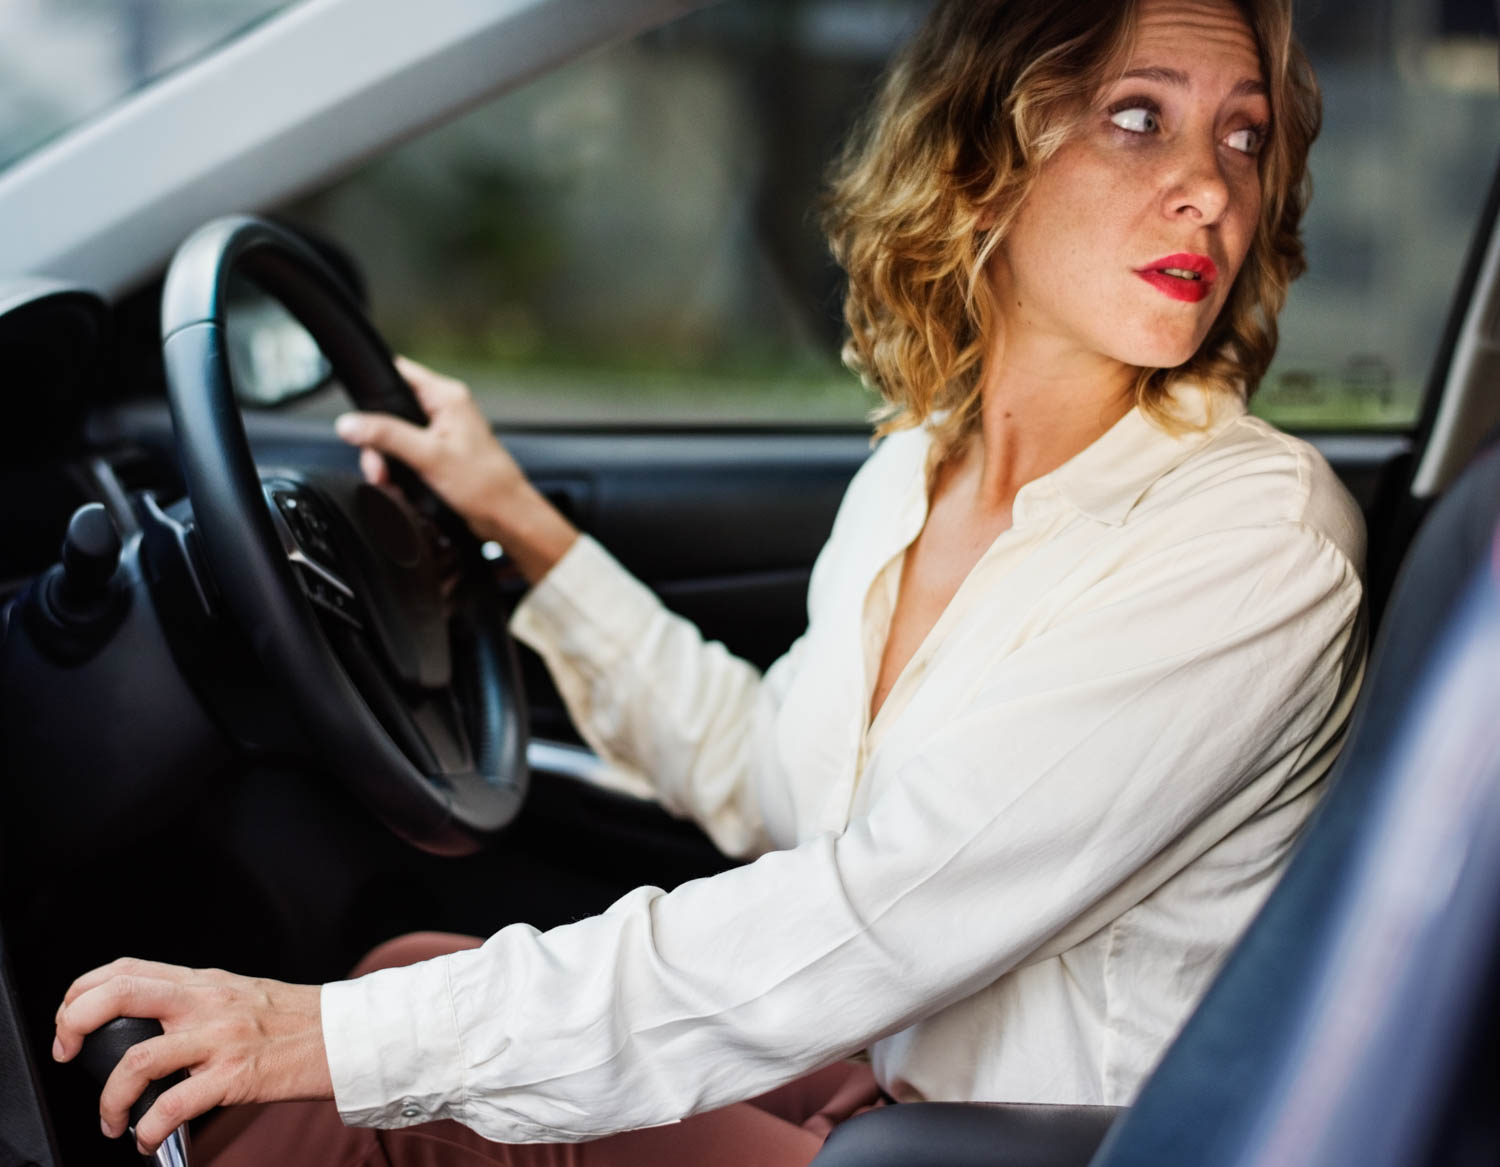 DUI Defense Lawyers Get Driving Under the Influence Charge Reduced to Reckless Driving in West Palm Beach, Florida